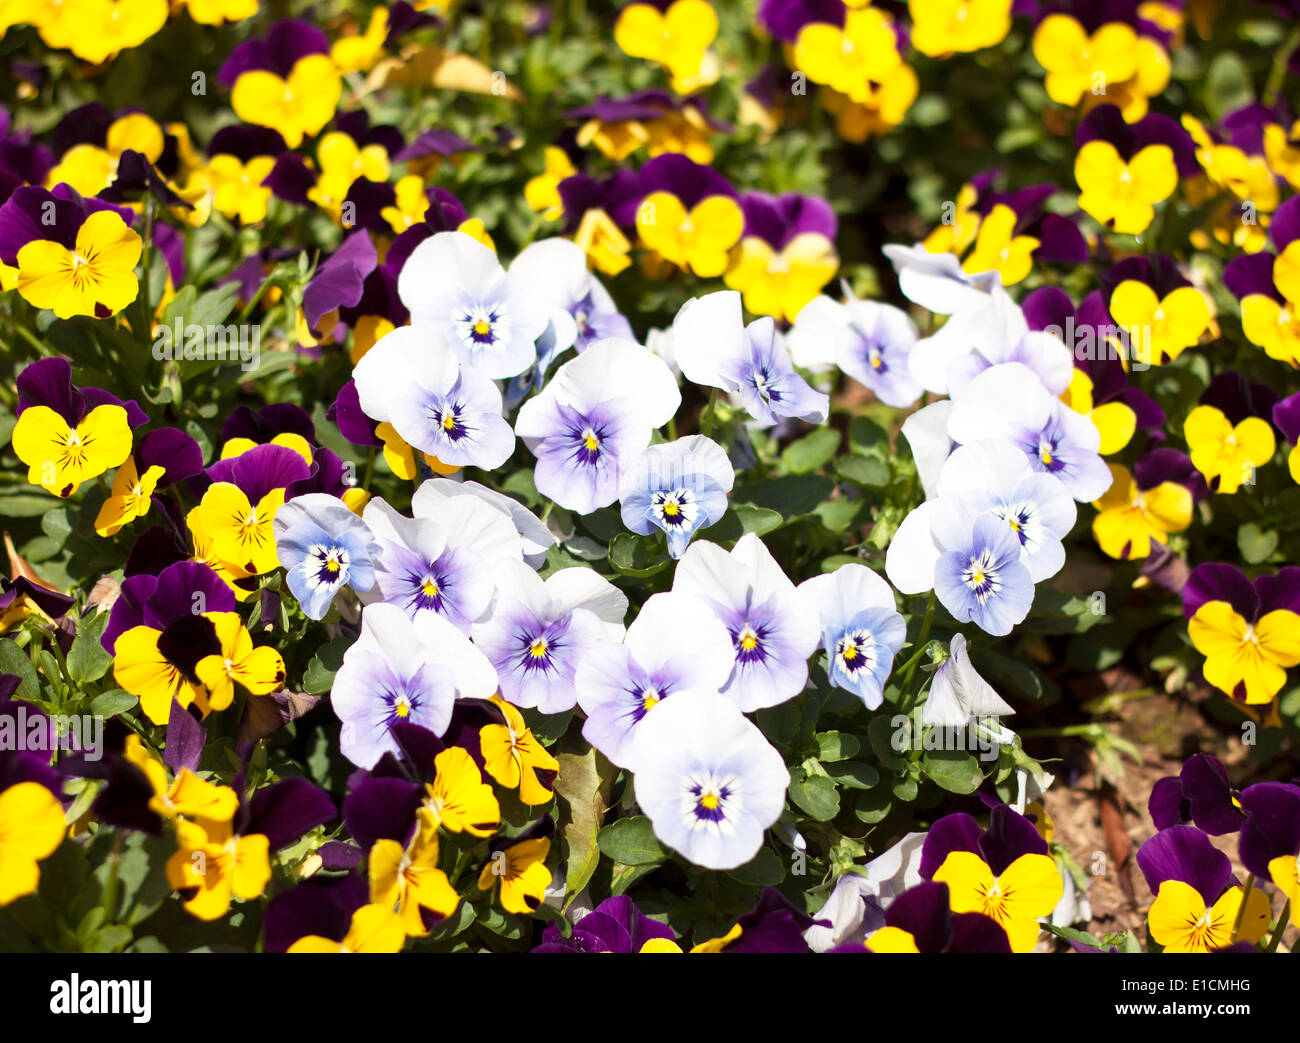 viola tricolor pansy, flower bed bloom in the garden. Stock Photo